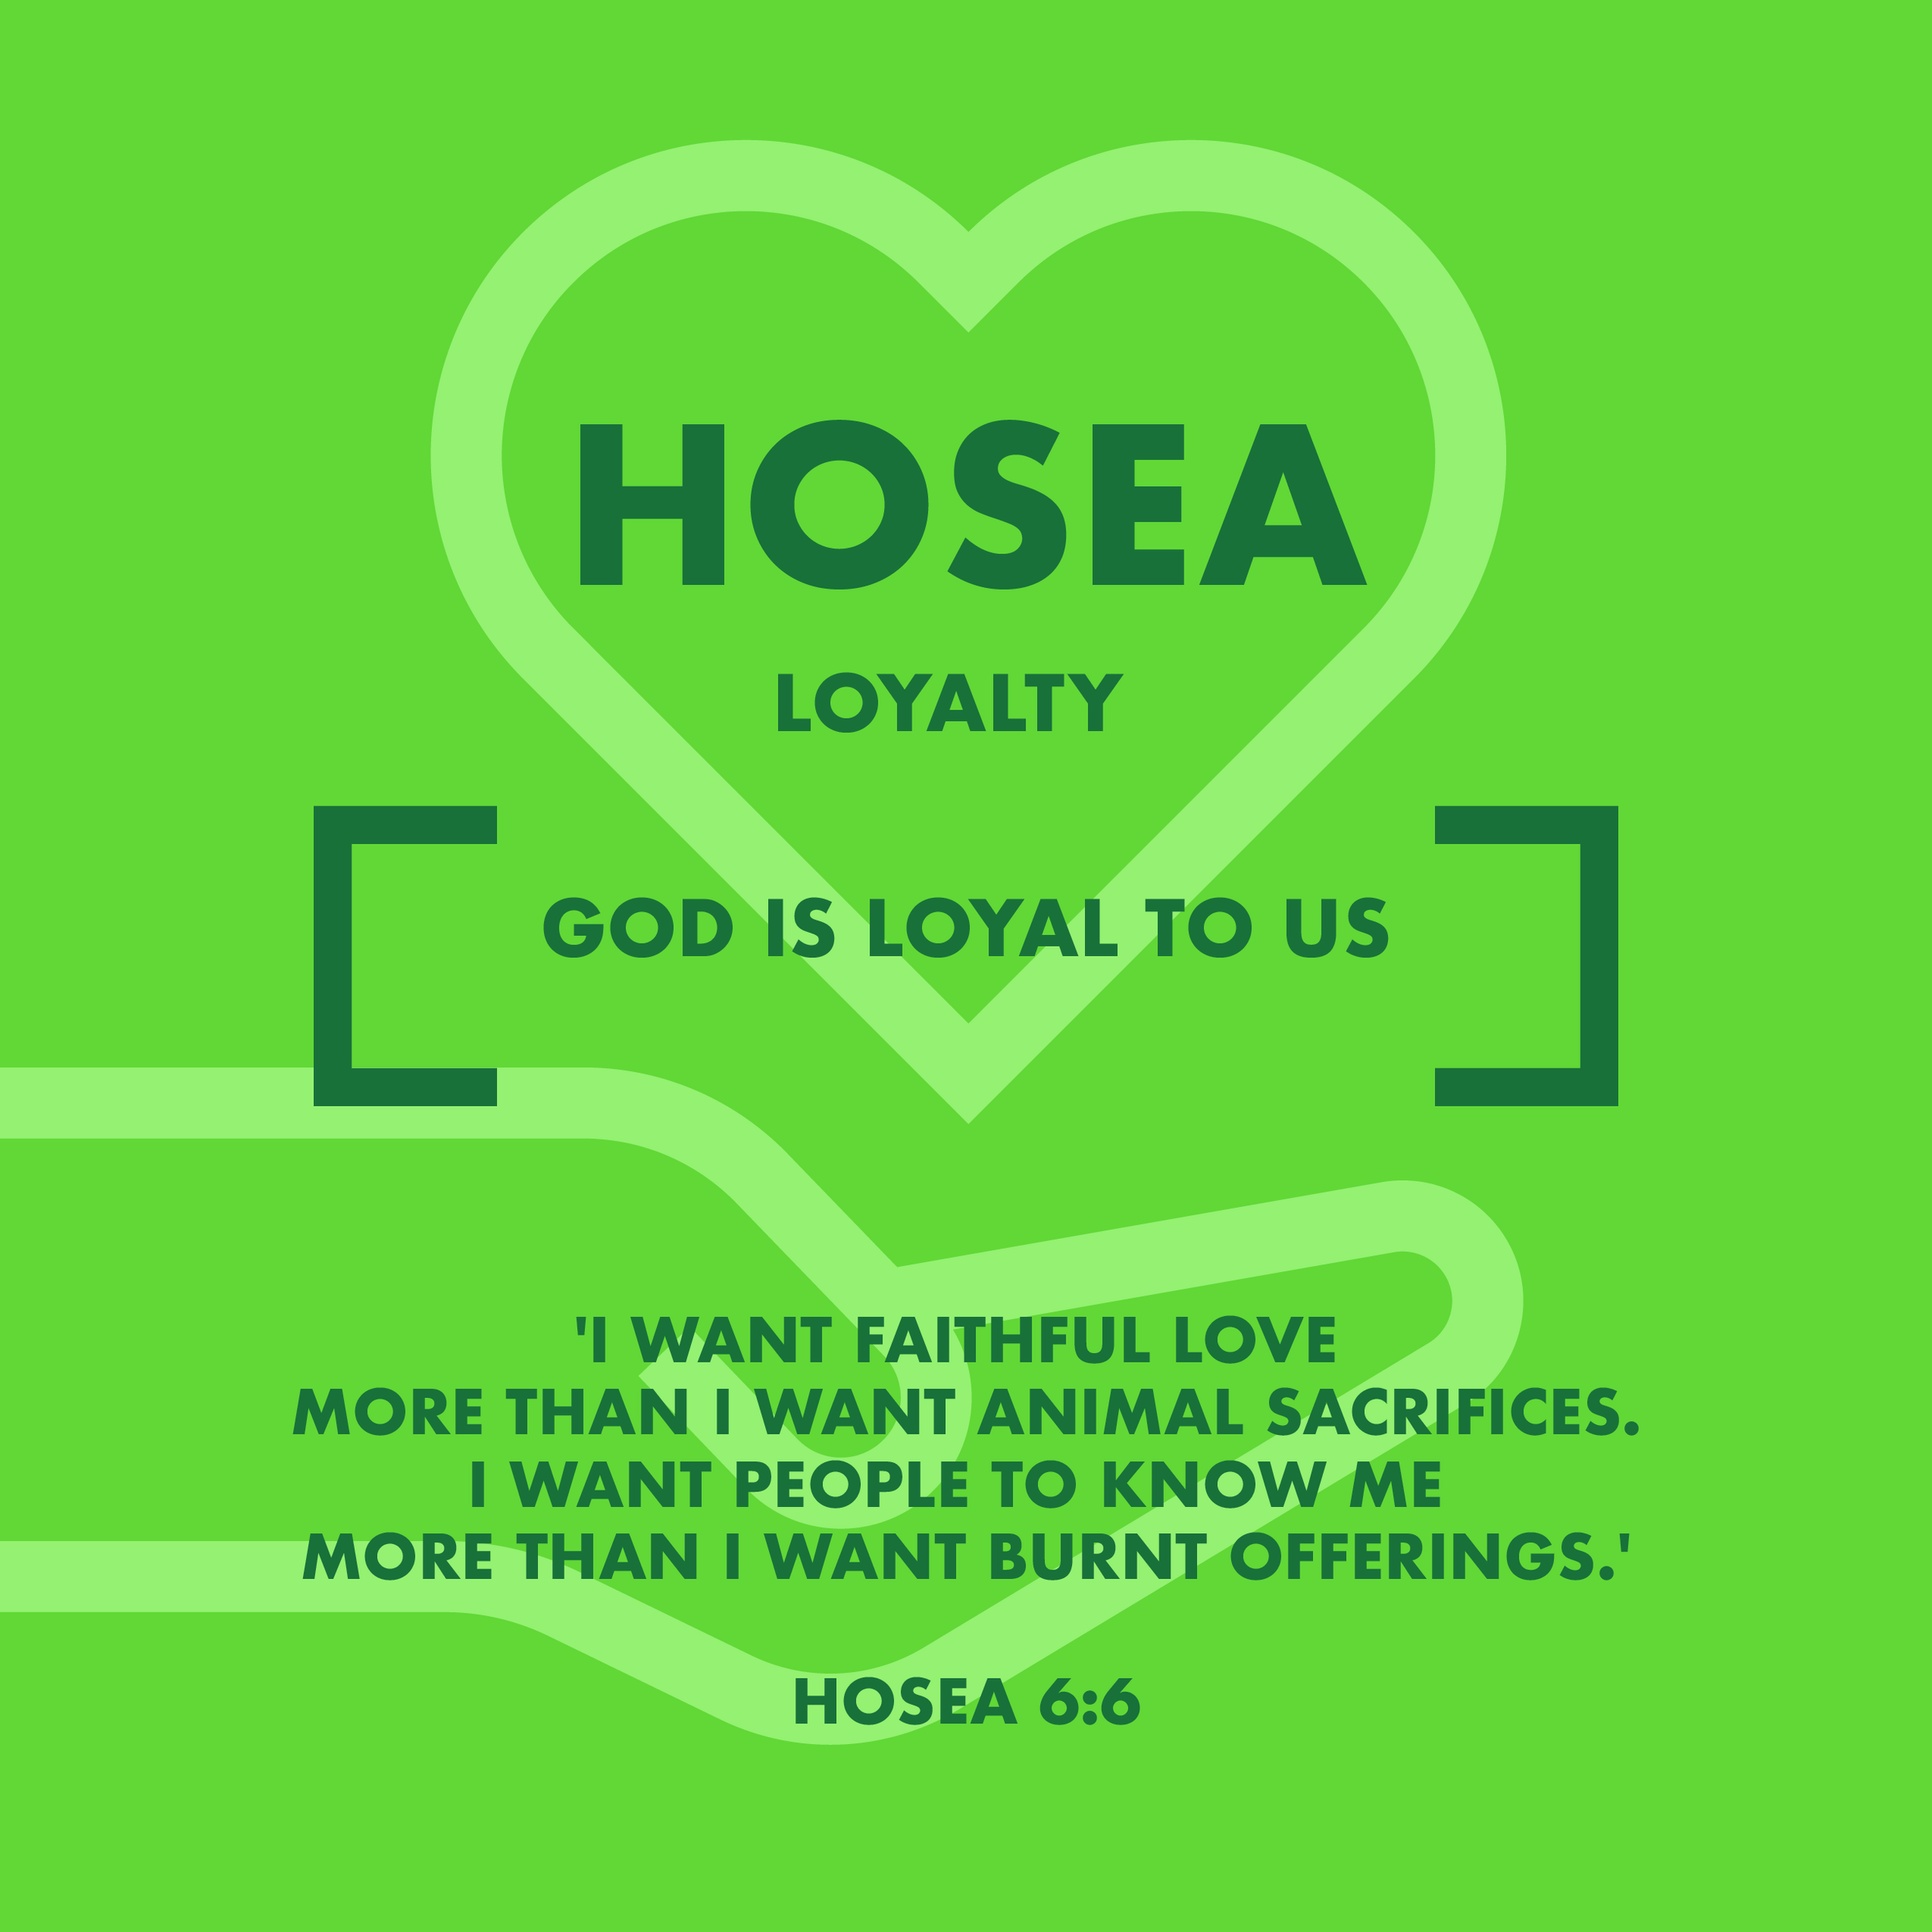 Books of the Bible_posters_26 Hoseah.png